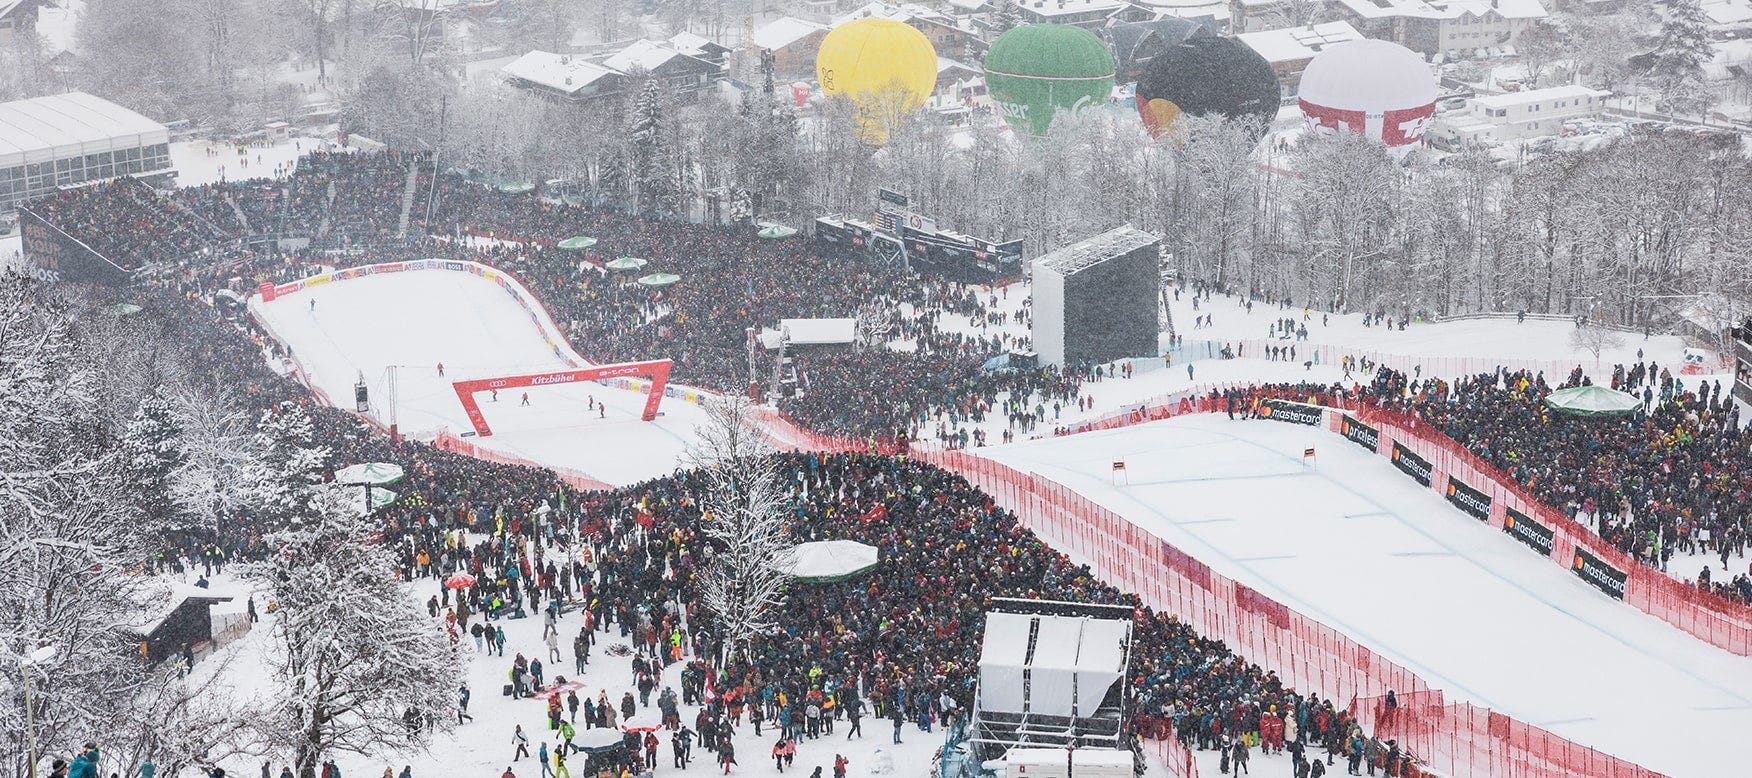 Overview of the finish area at The Hahnenkamm Races